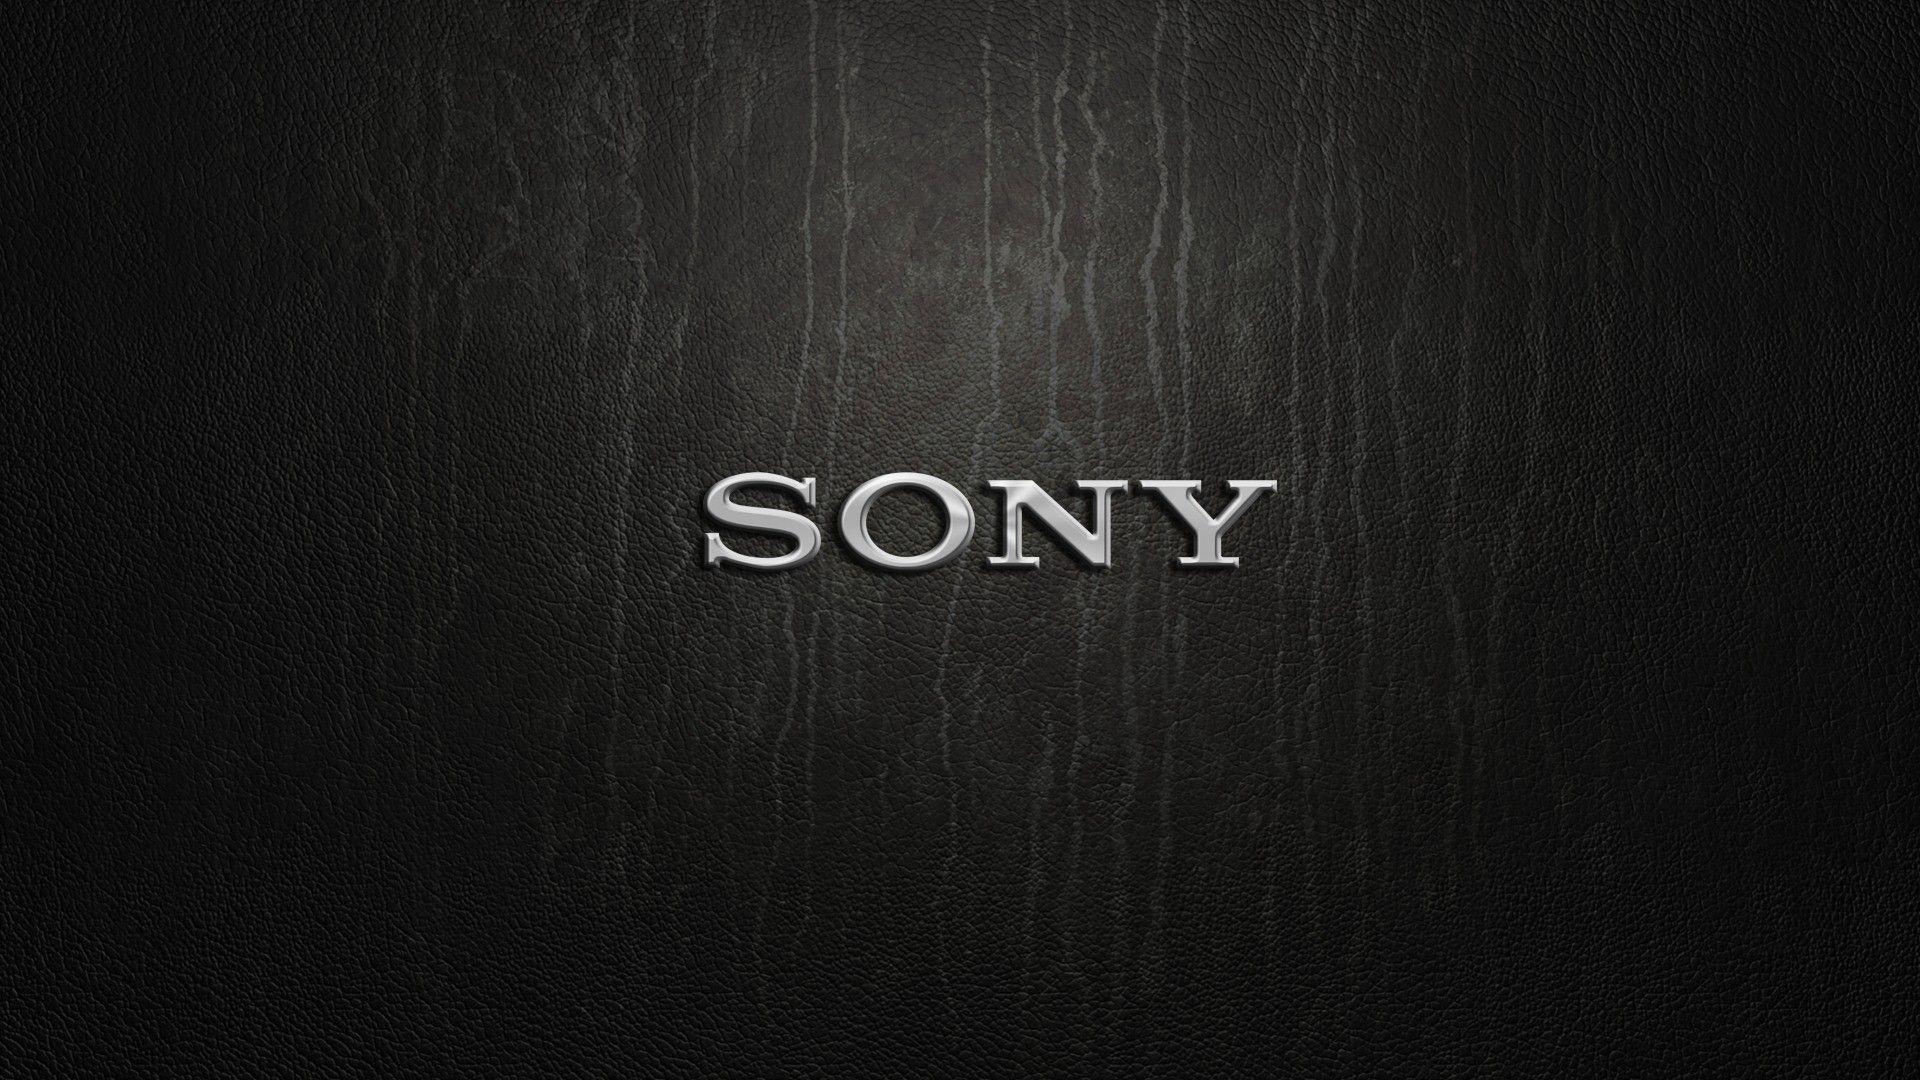 Sony Uhd Wallpapers Top Free Sony Uhd Backgrounds Wallpaperaccess